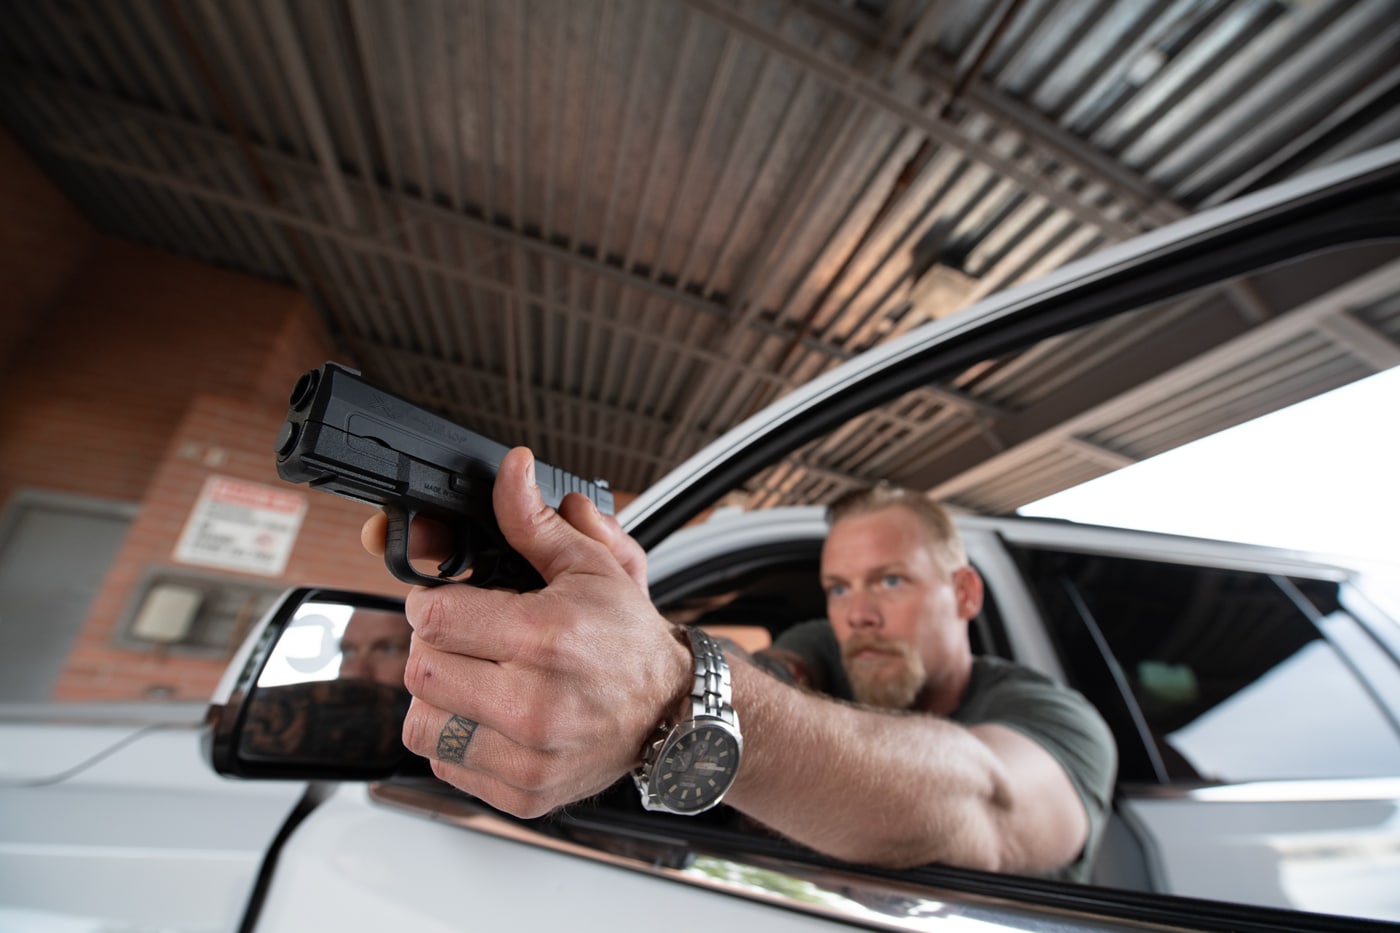 using car door for cover during a defensive shooting